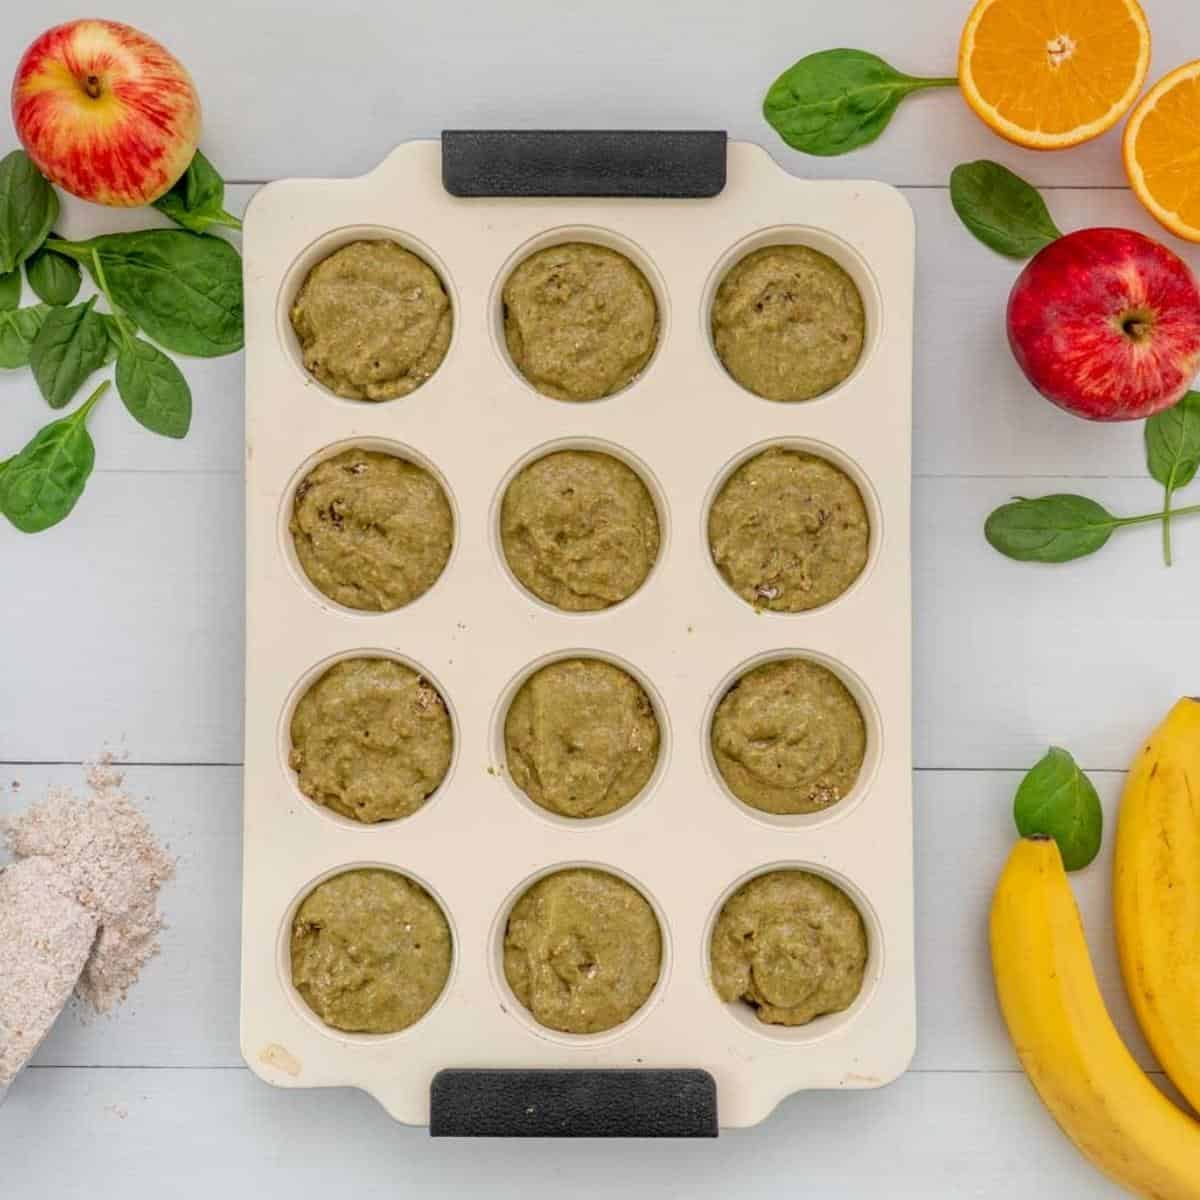 Spinach muffin batter in a 12 cup muffin tray ready to be baked.